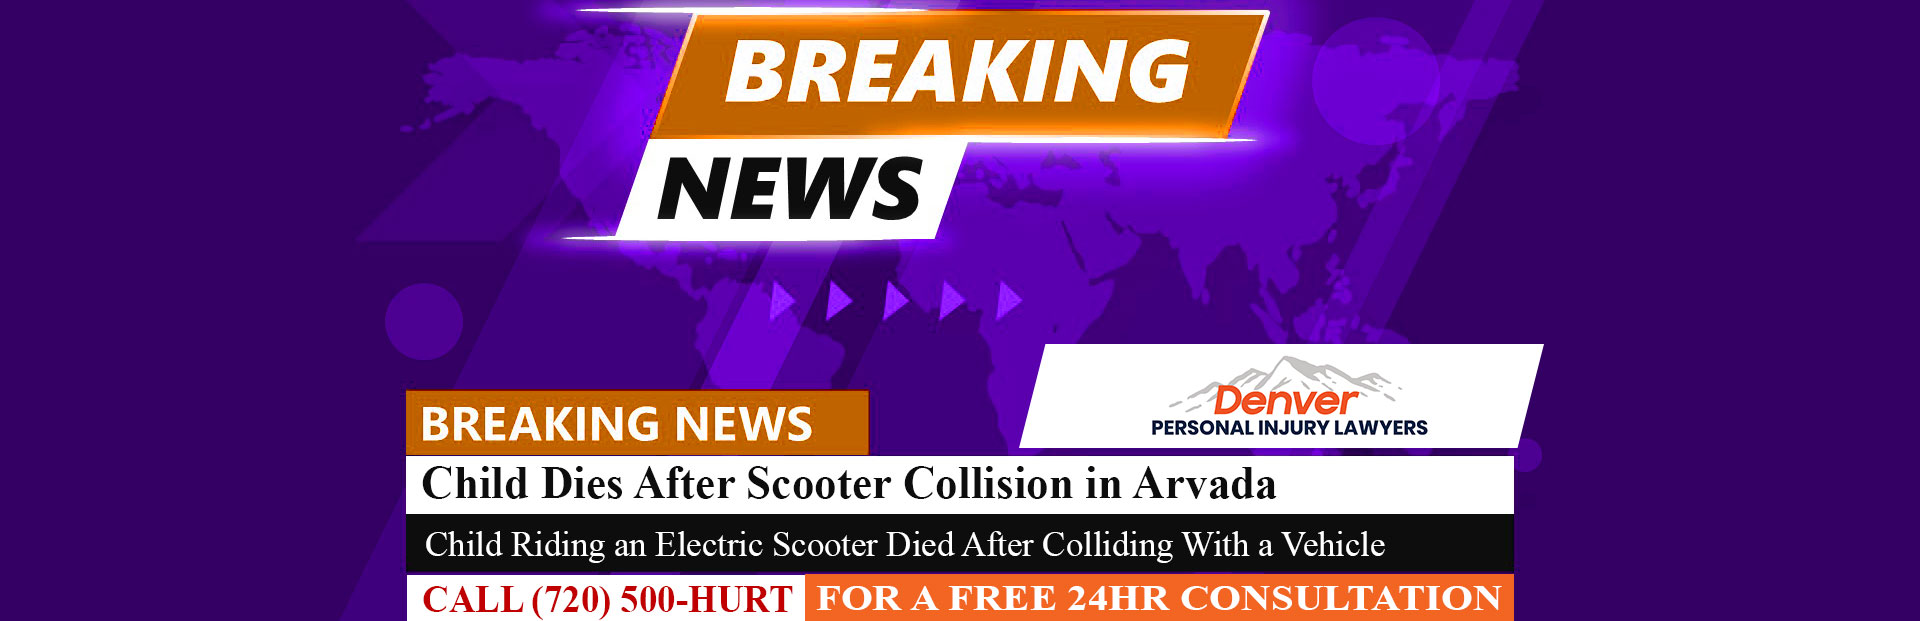 [9-19-22] Child Dies After Scooter Collides With Vehicle in Arvada